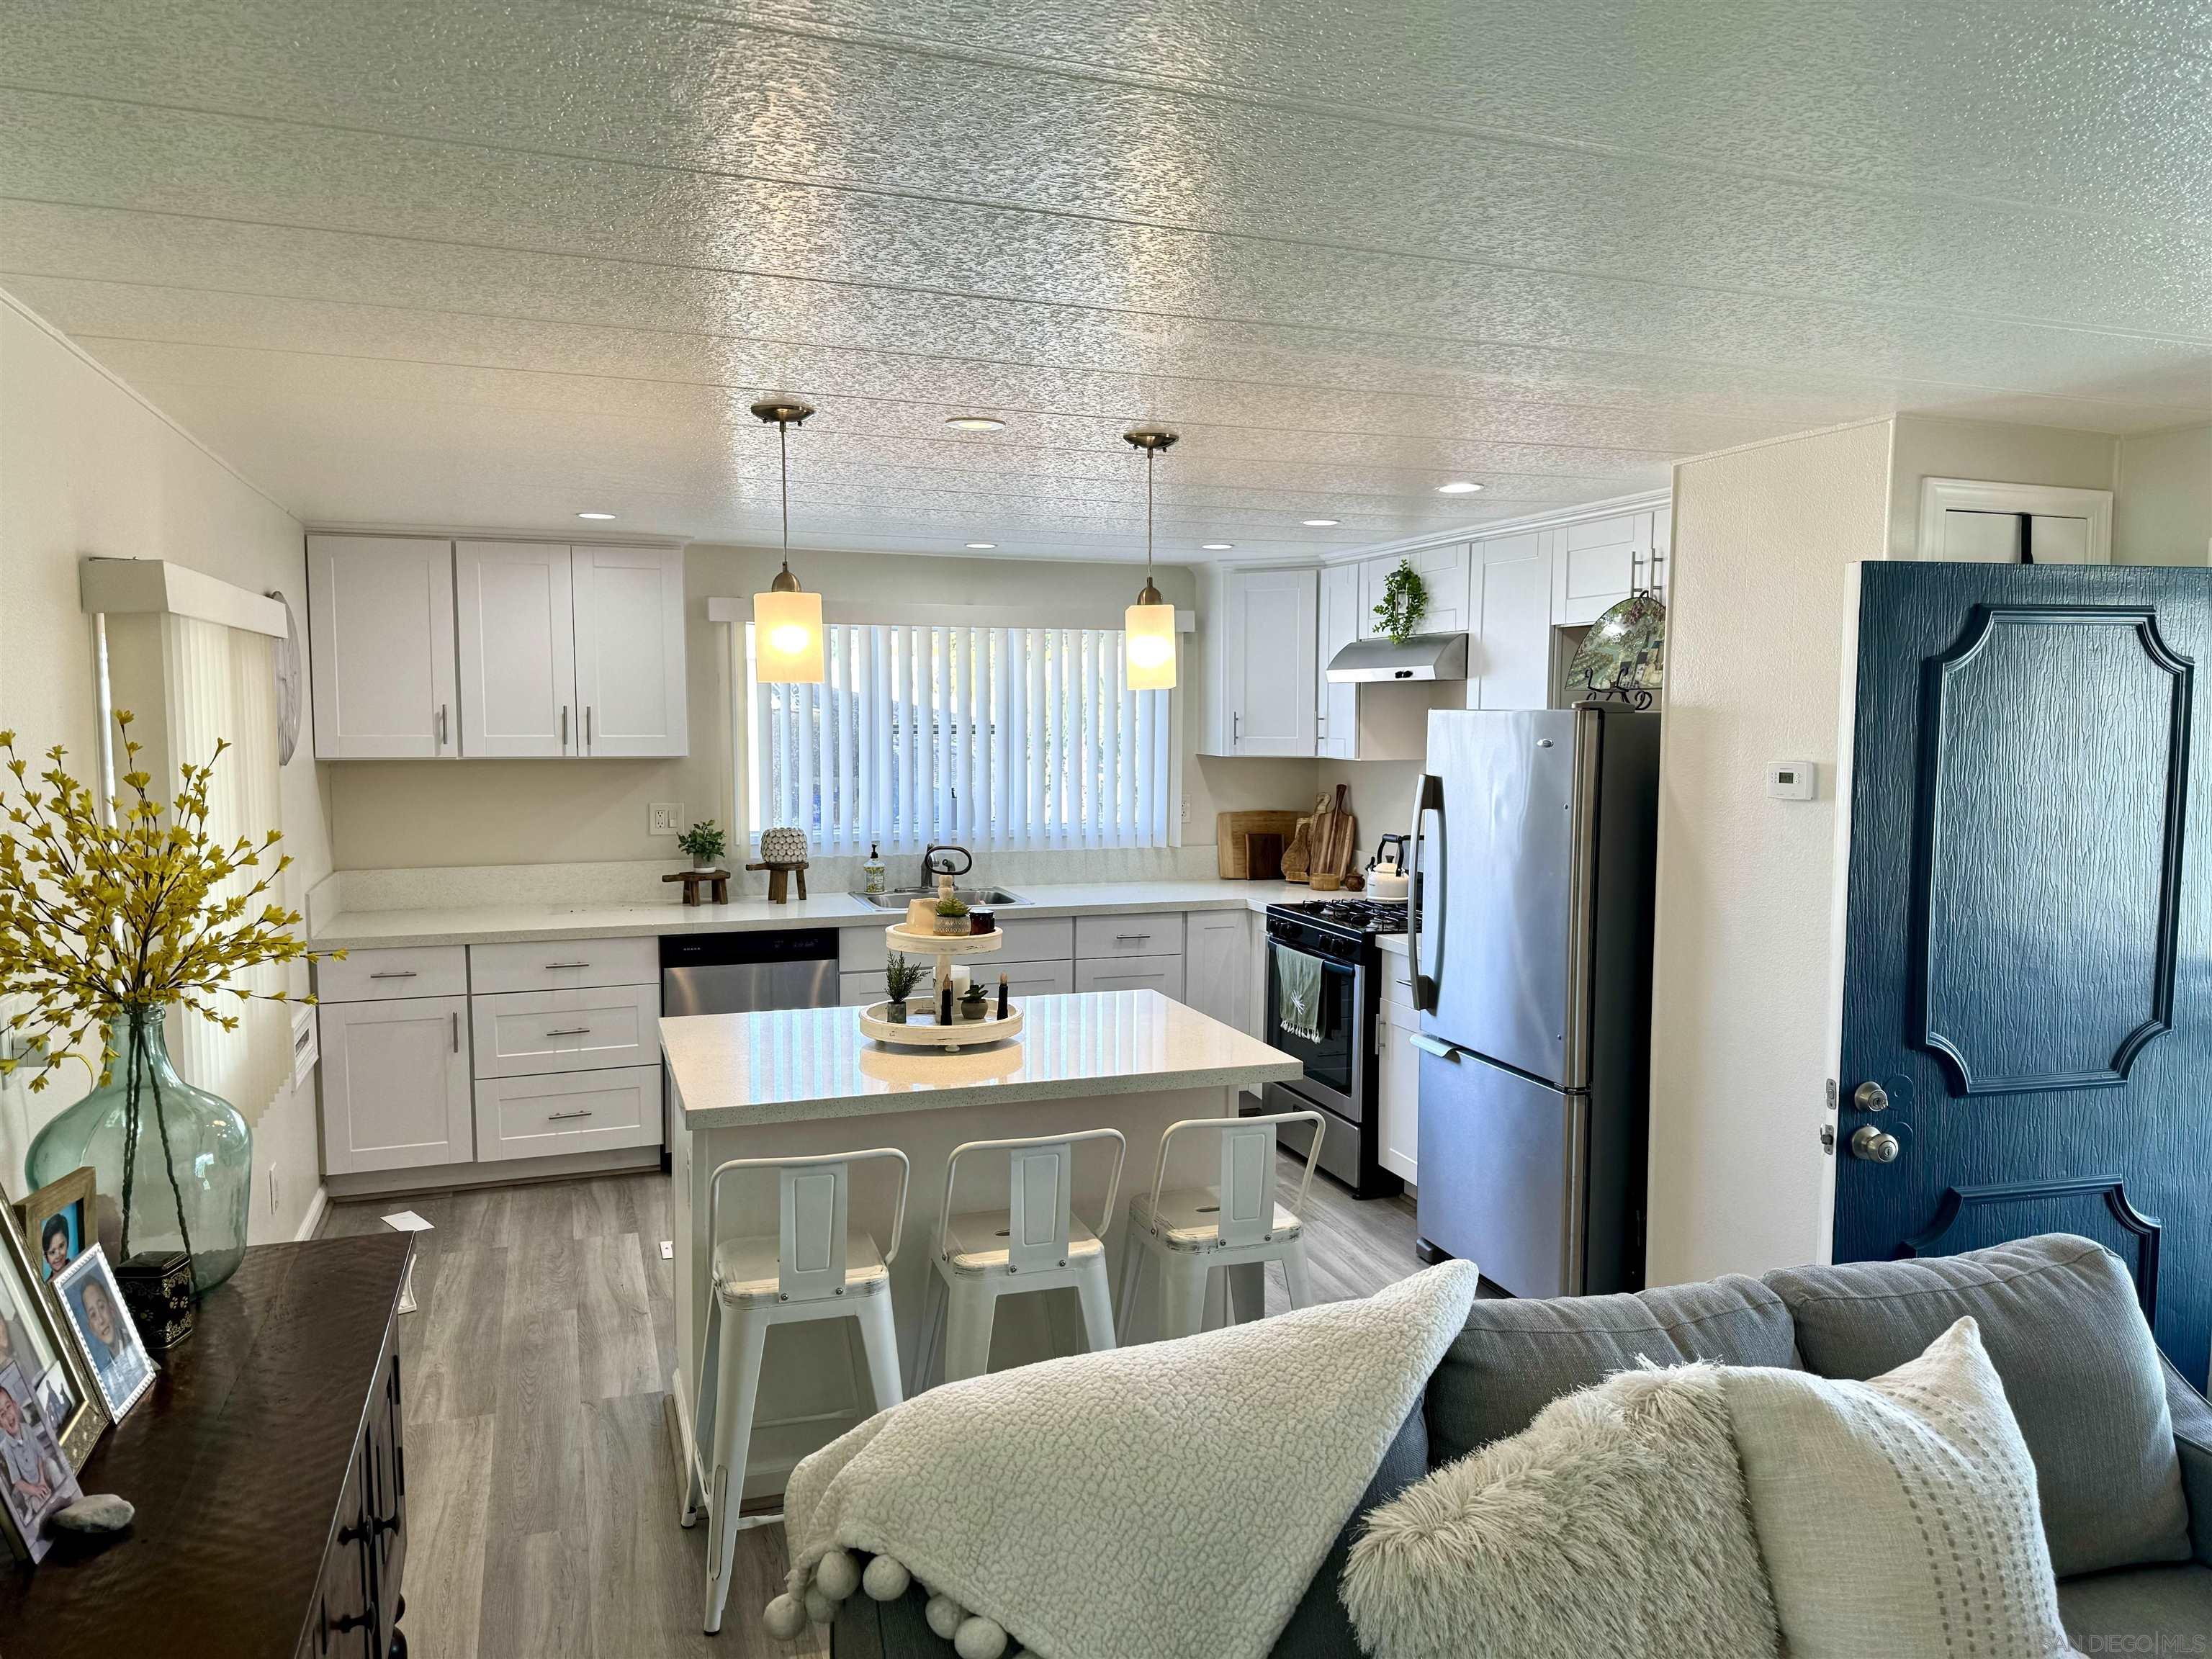 a large kitchen with stainless steel appliances kitchen island granite countertop a refrigerator a stove a sink dishwasher with a dining table and chairs with wooden floor